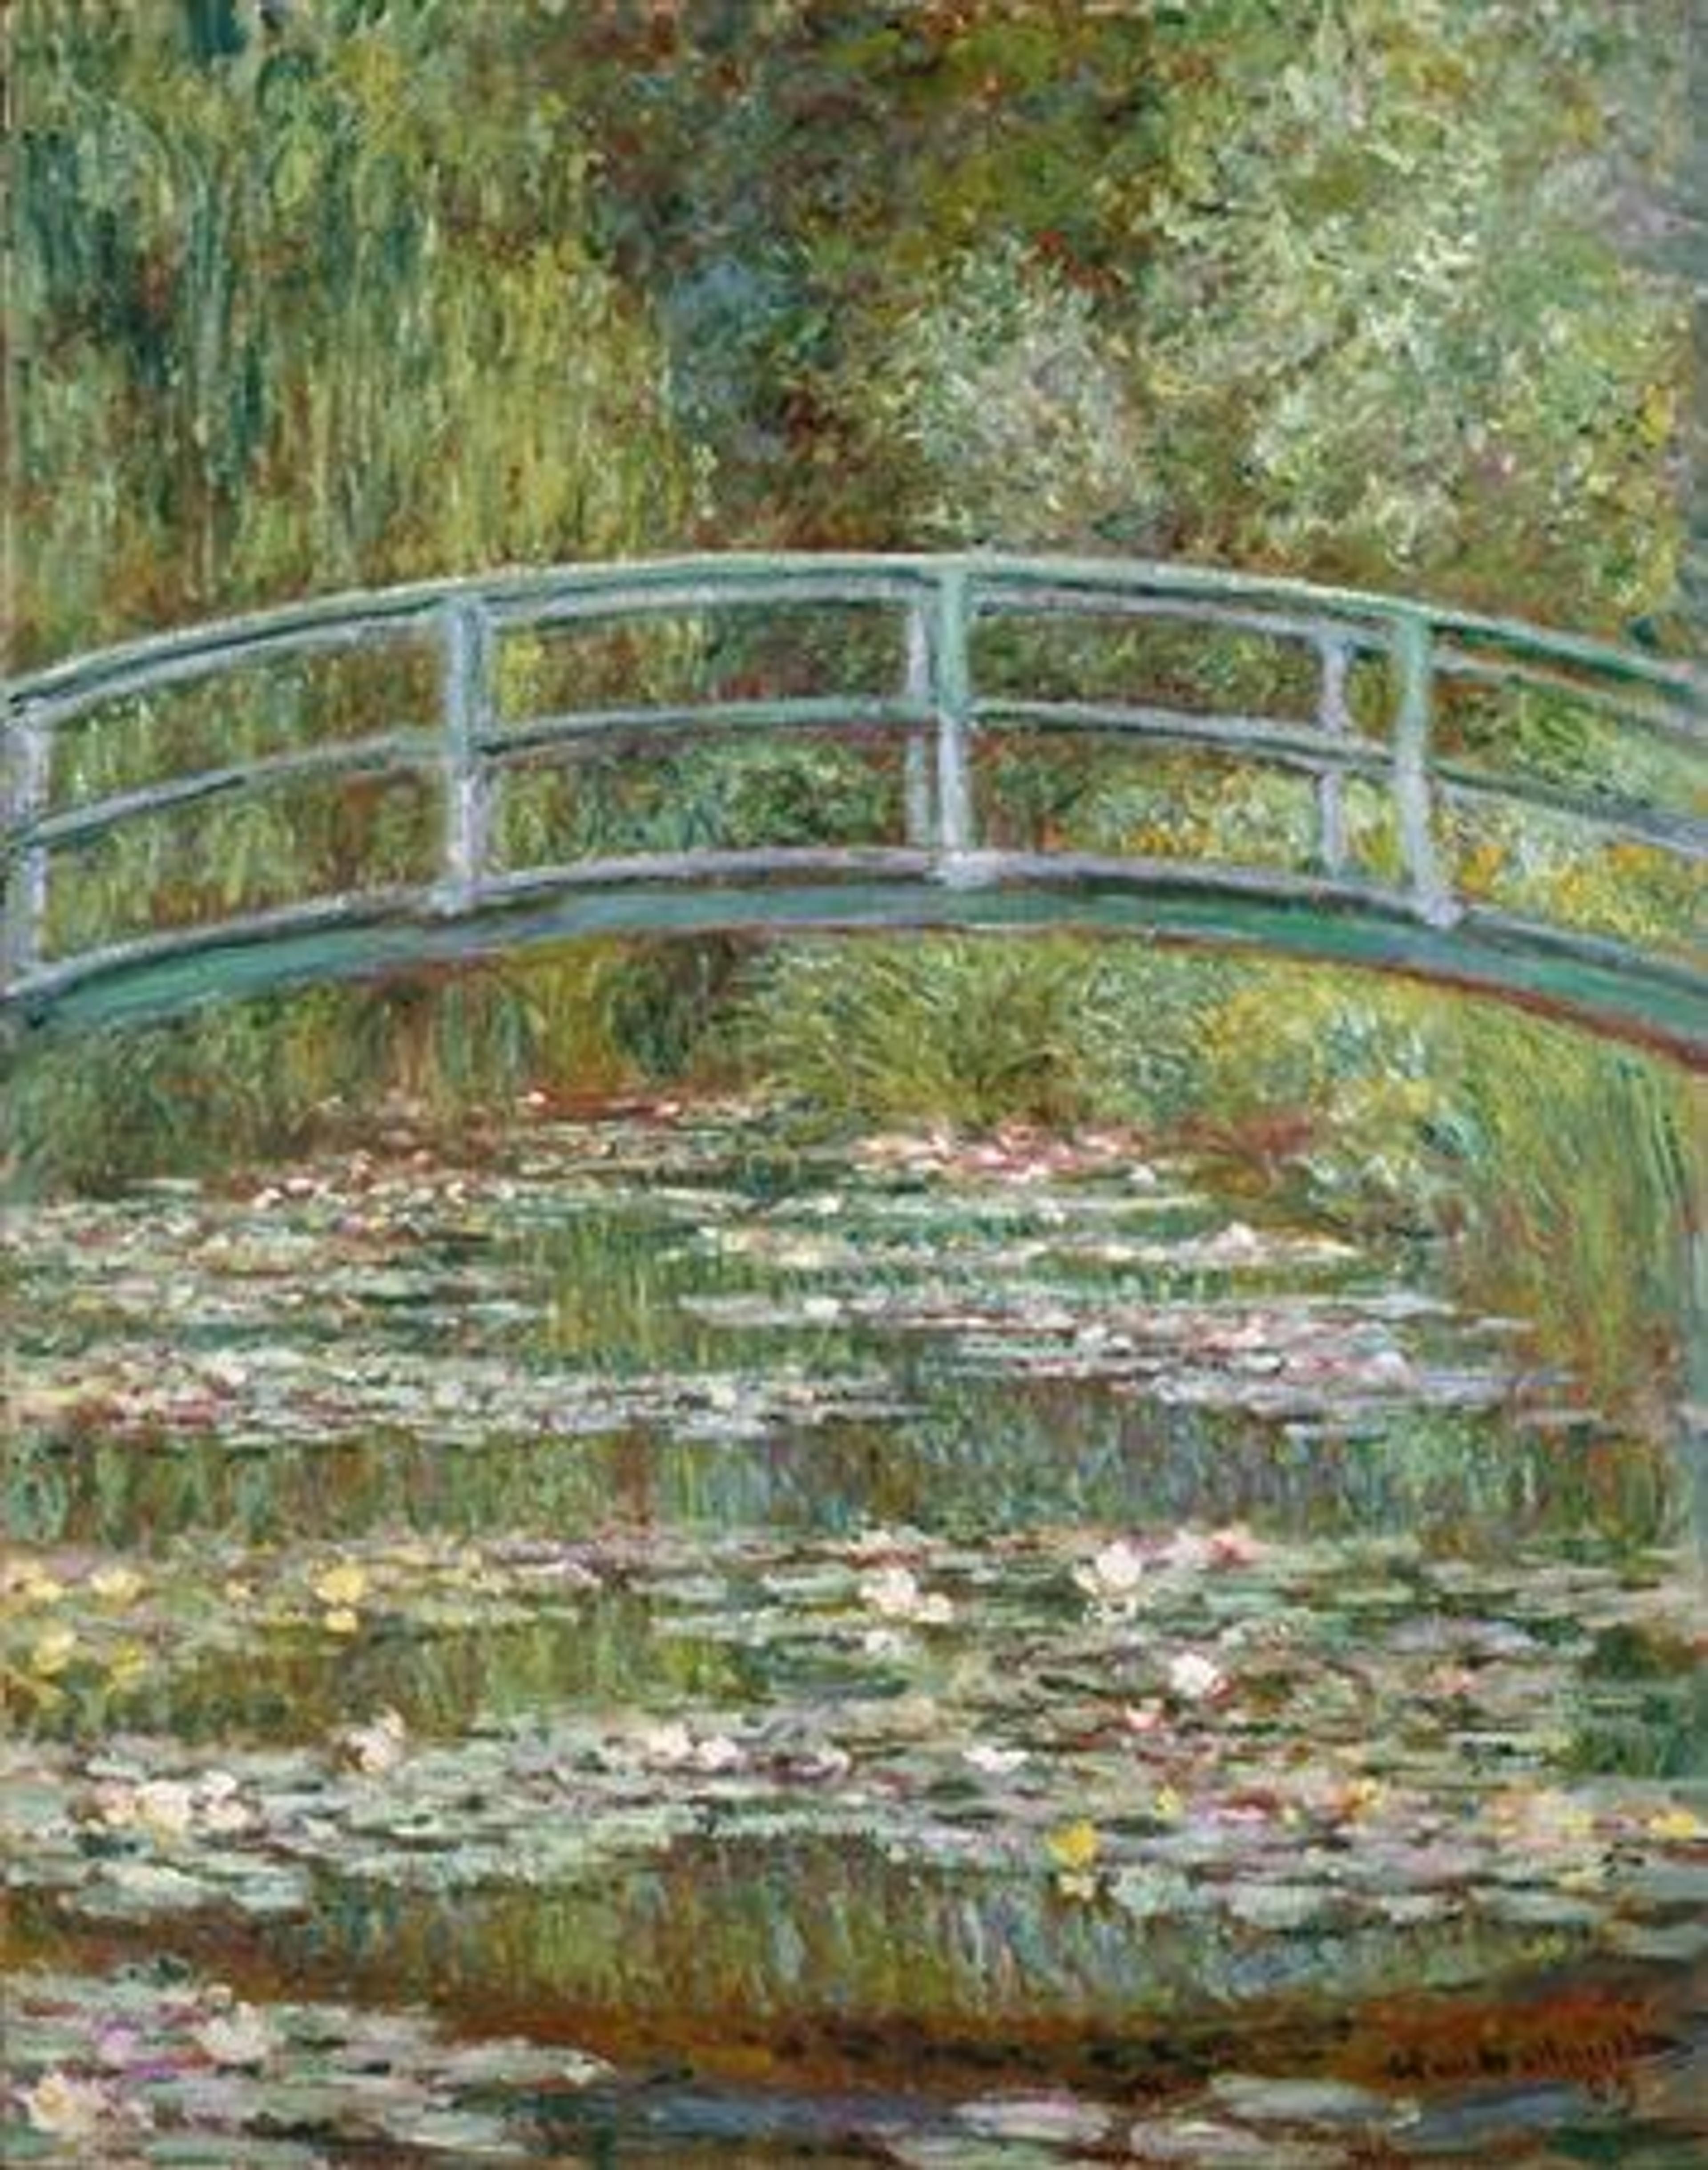 Claude Monet's 'Bridge over a Pond of Water Lilies,' an Impressionist masterwork of verdant greens and floral colors